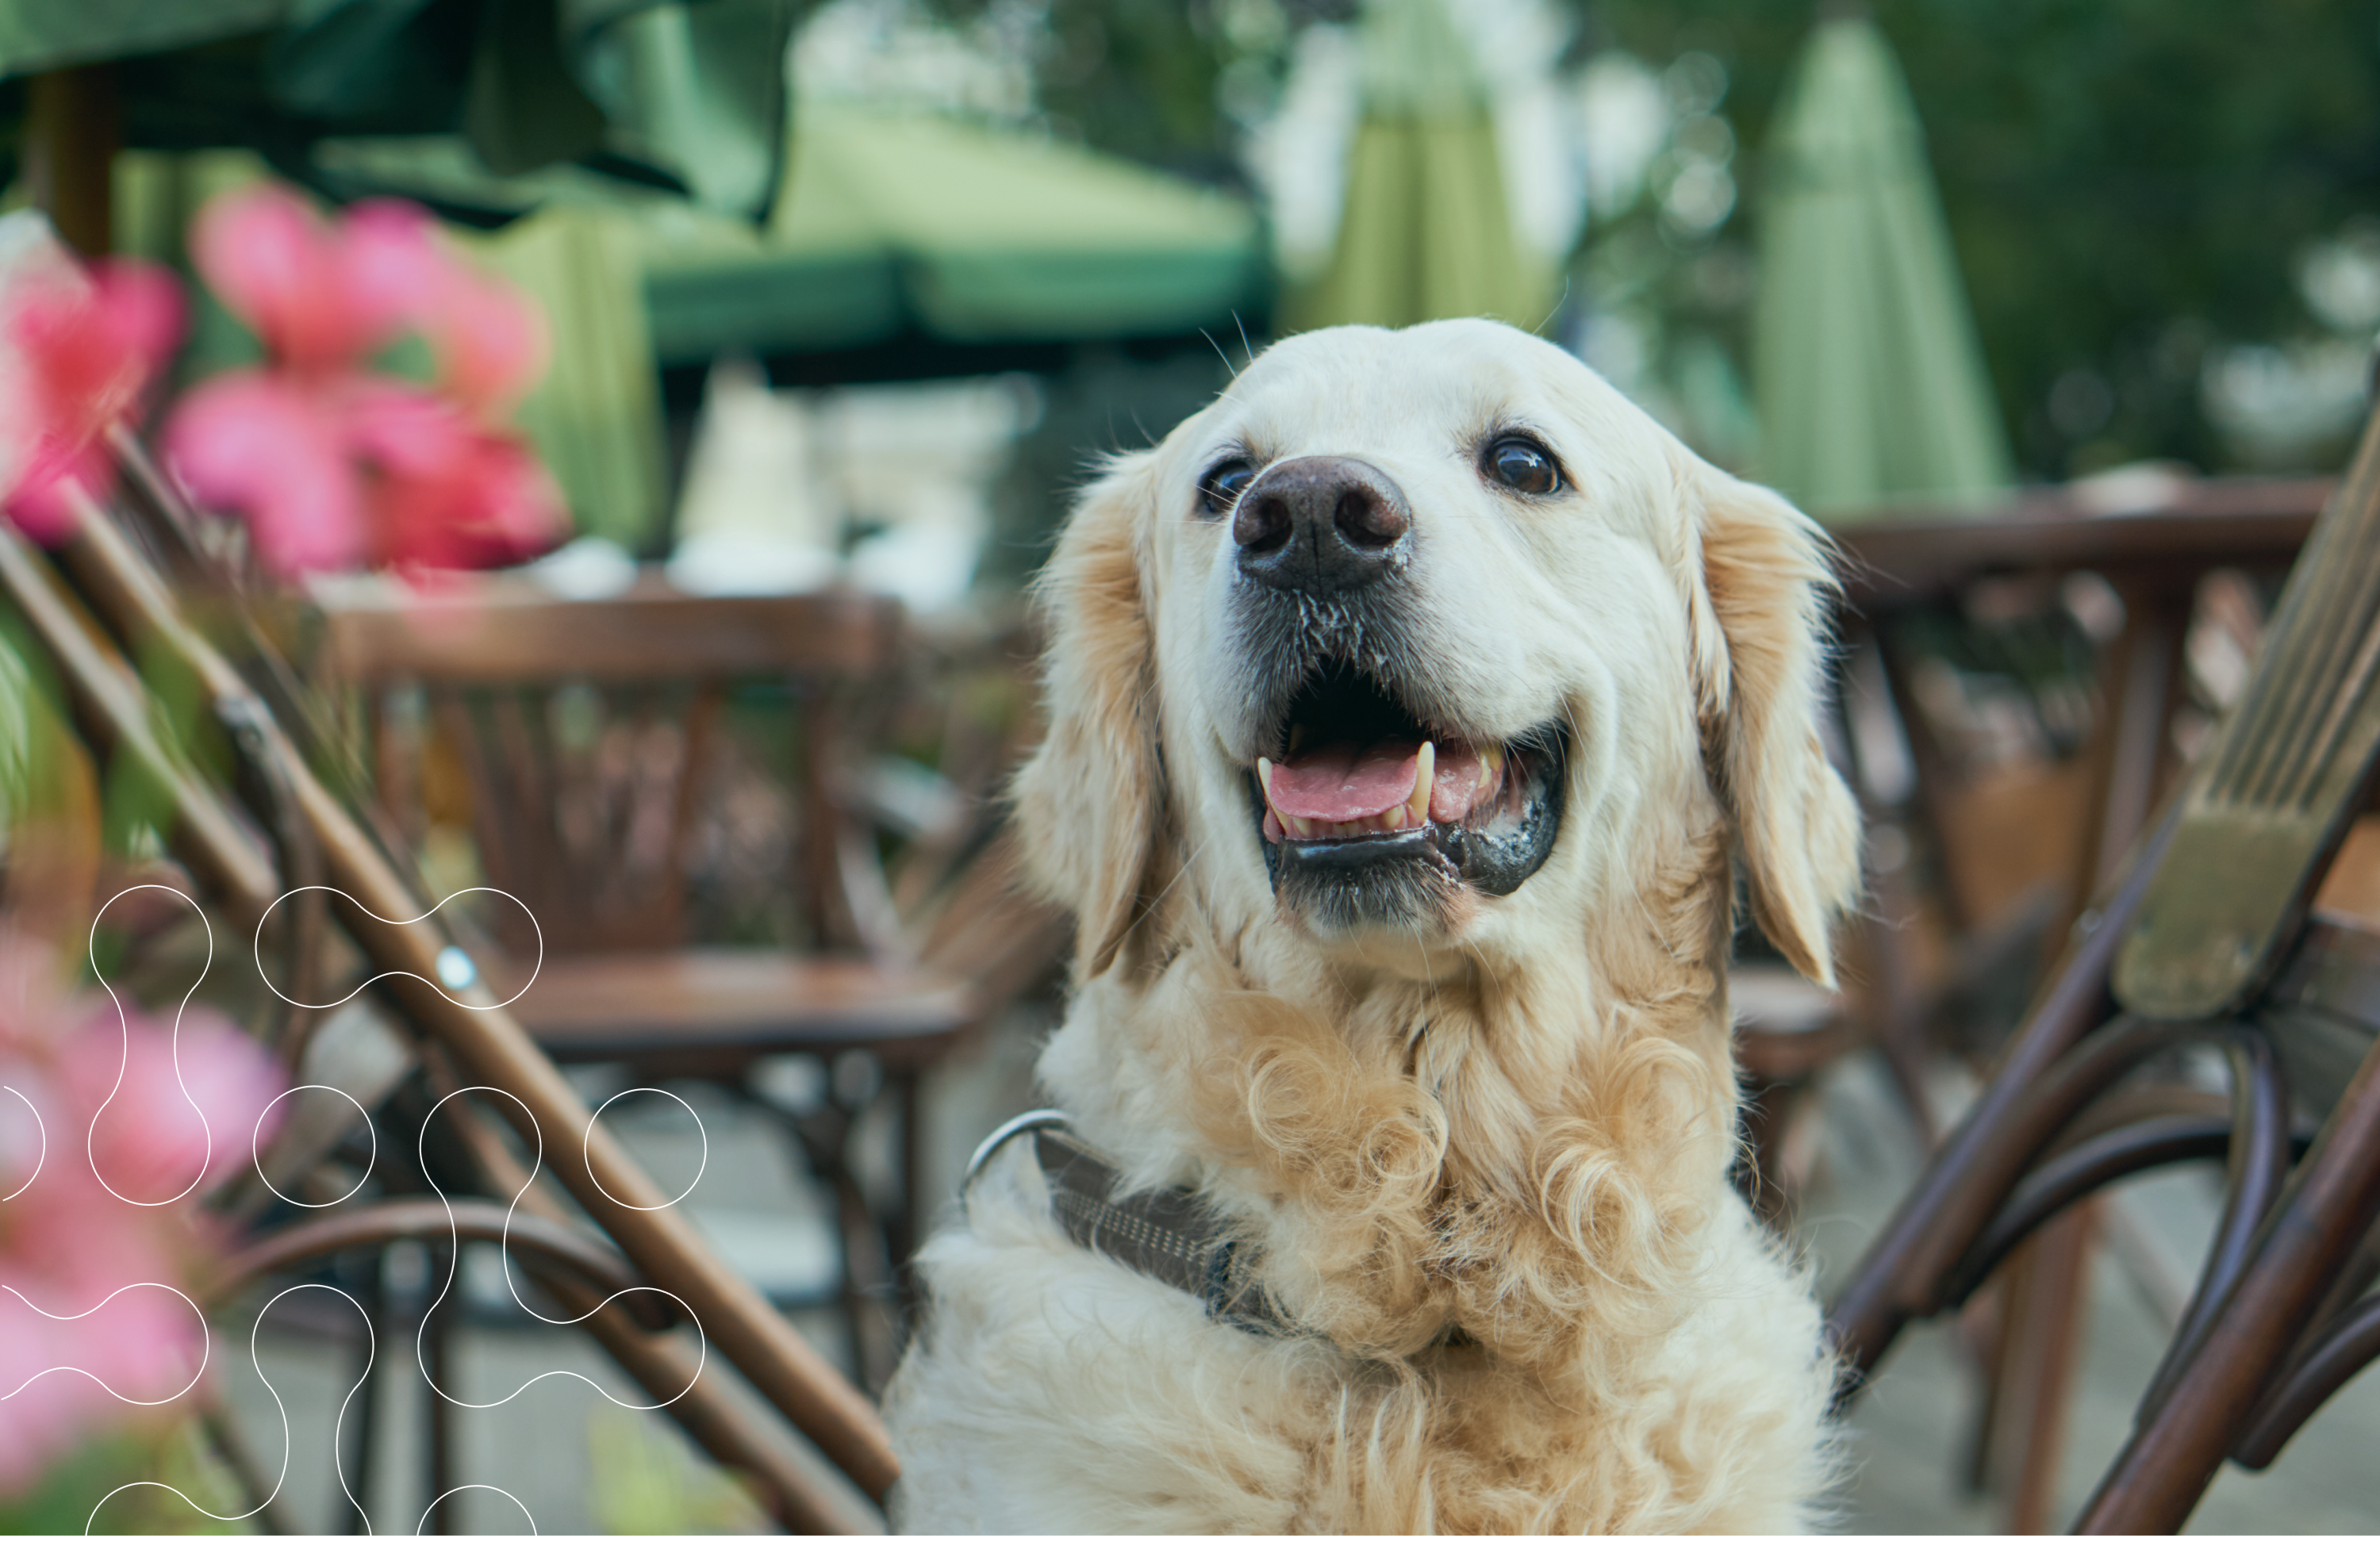 Pet-Friendly Hospitality: Ensuring Safety and Health for Your Guests